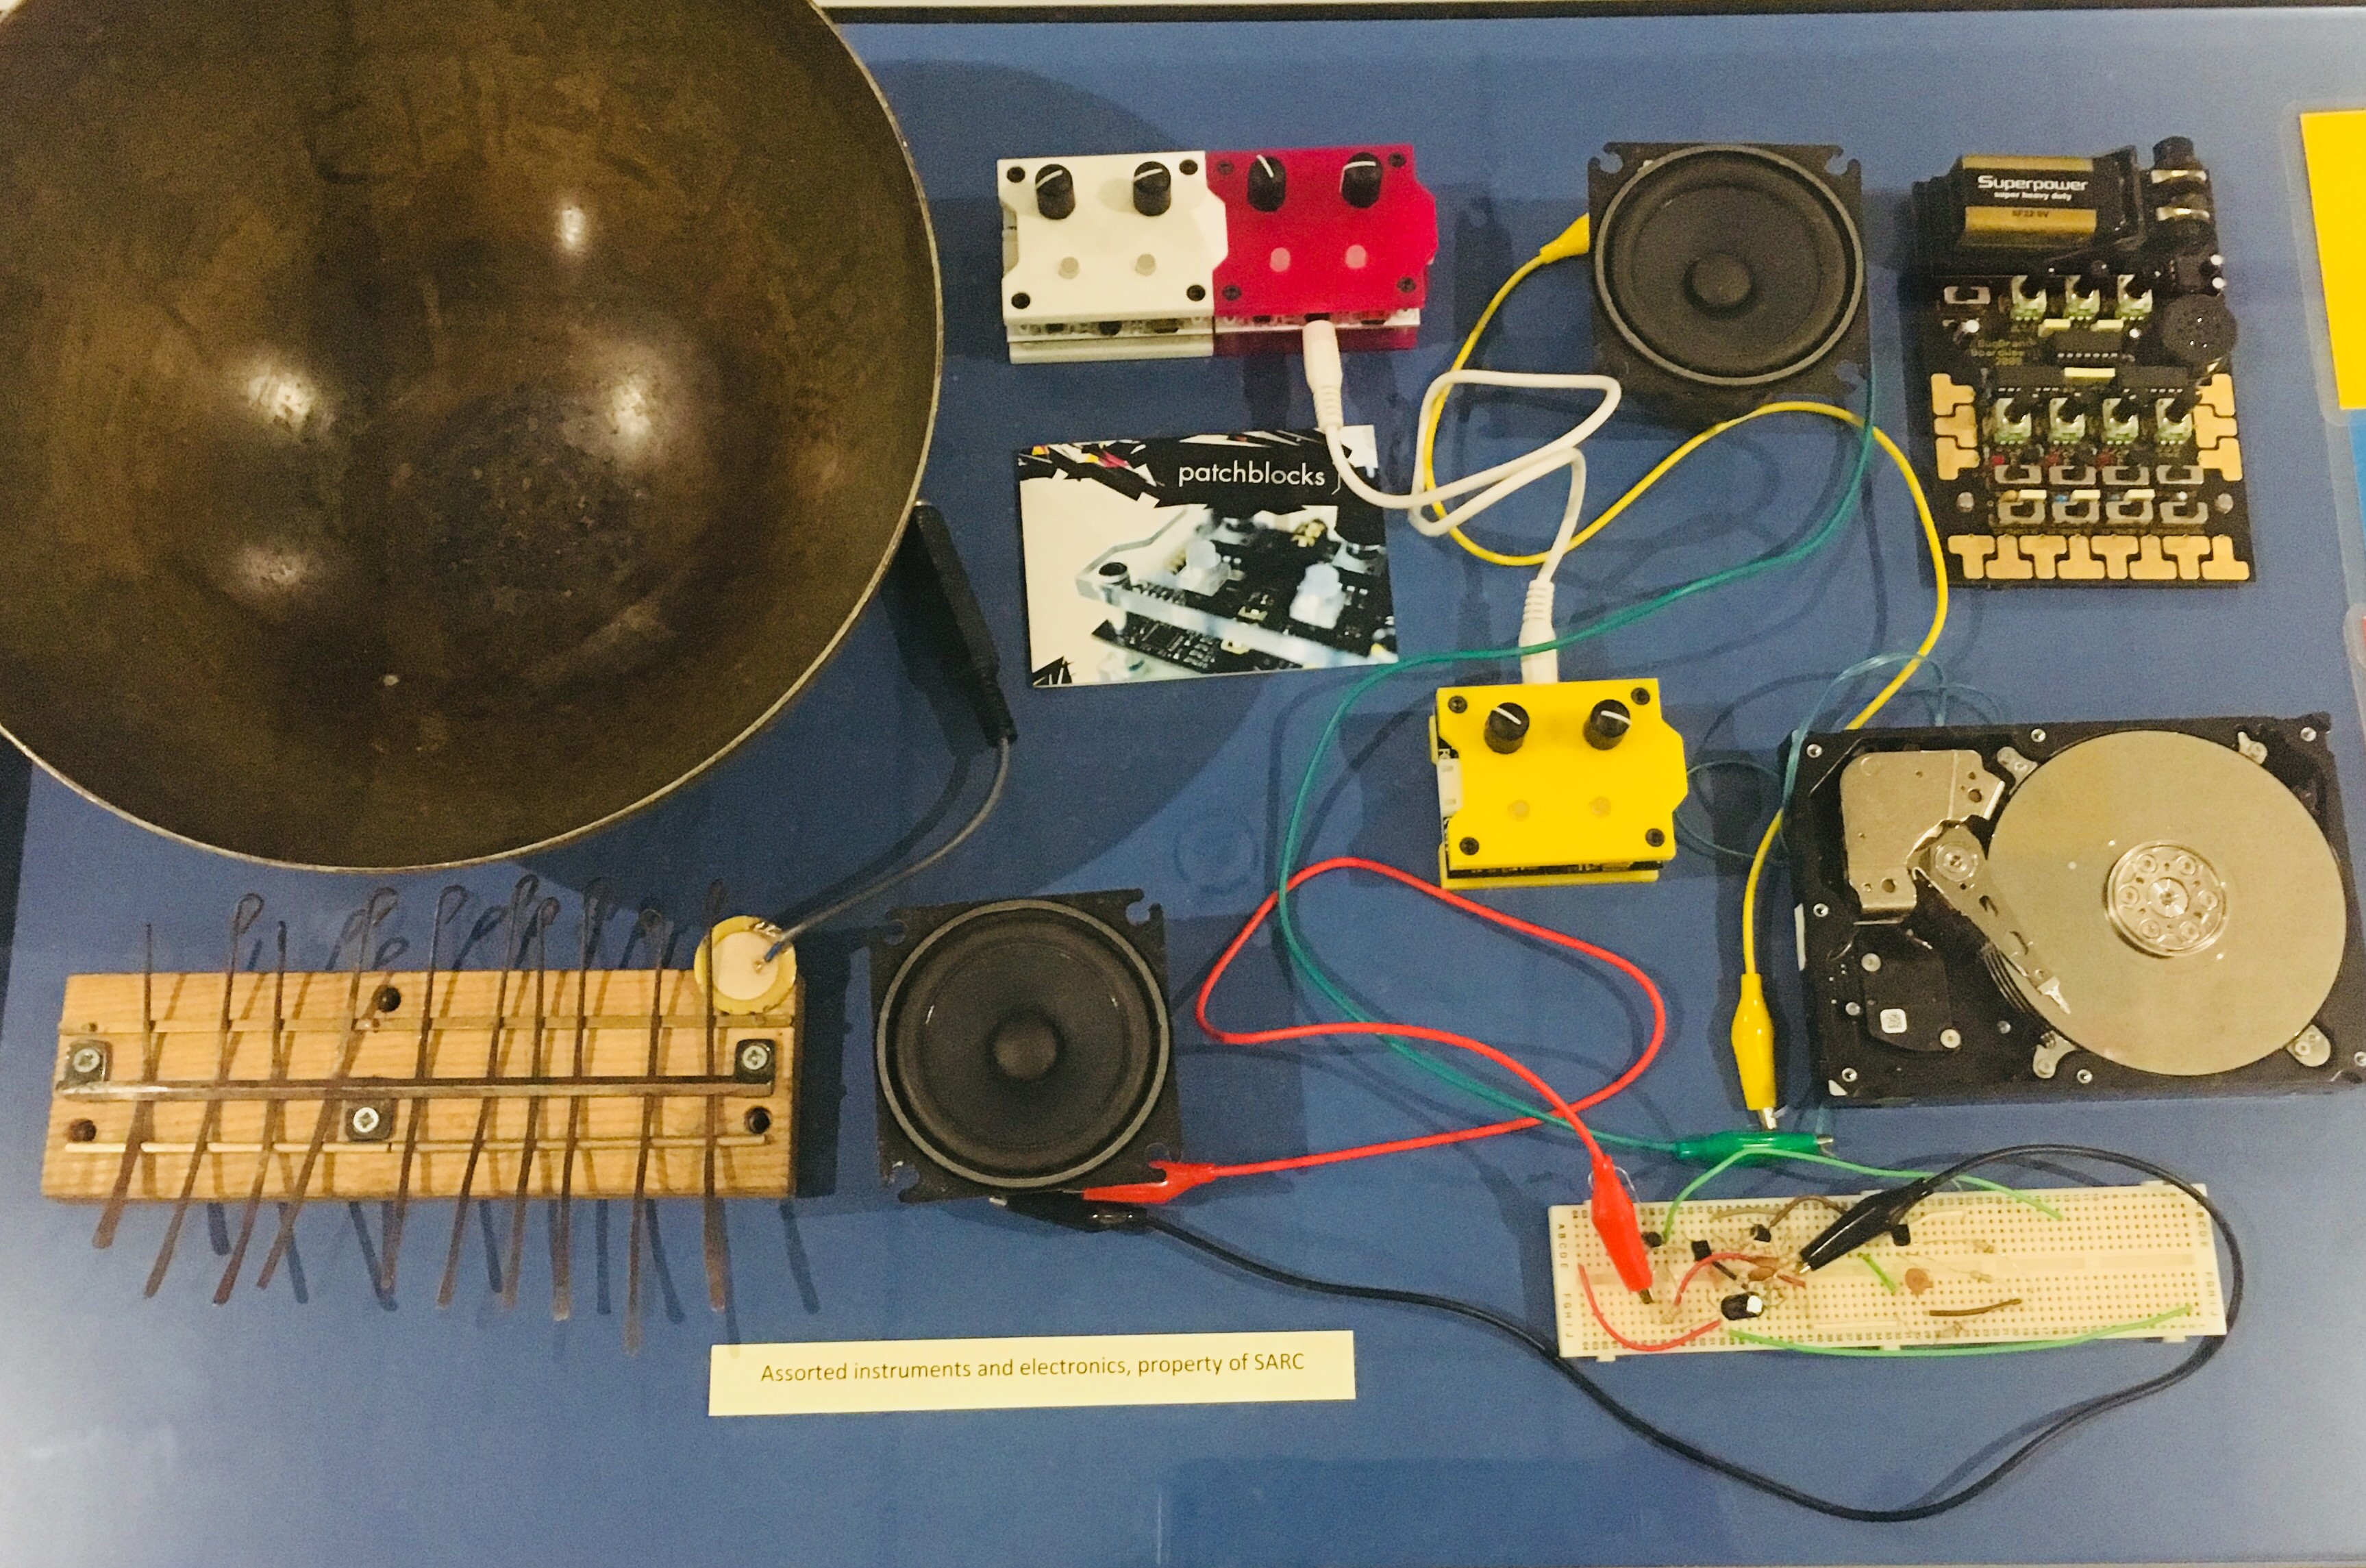 Assorted instruments and electronics, property of SARC.